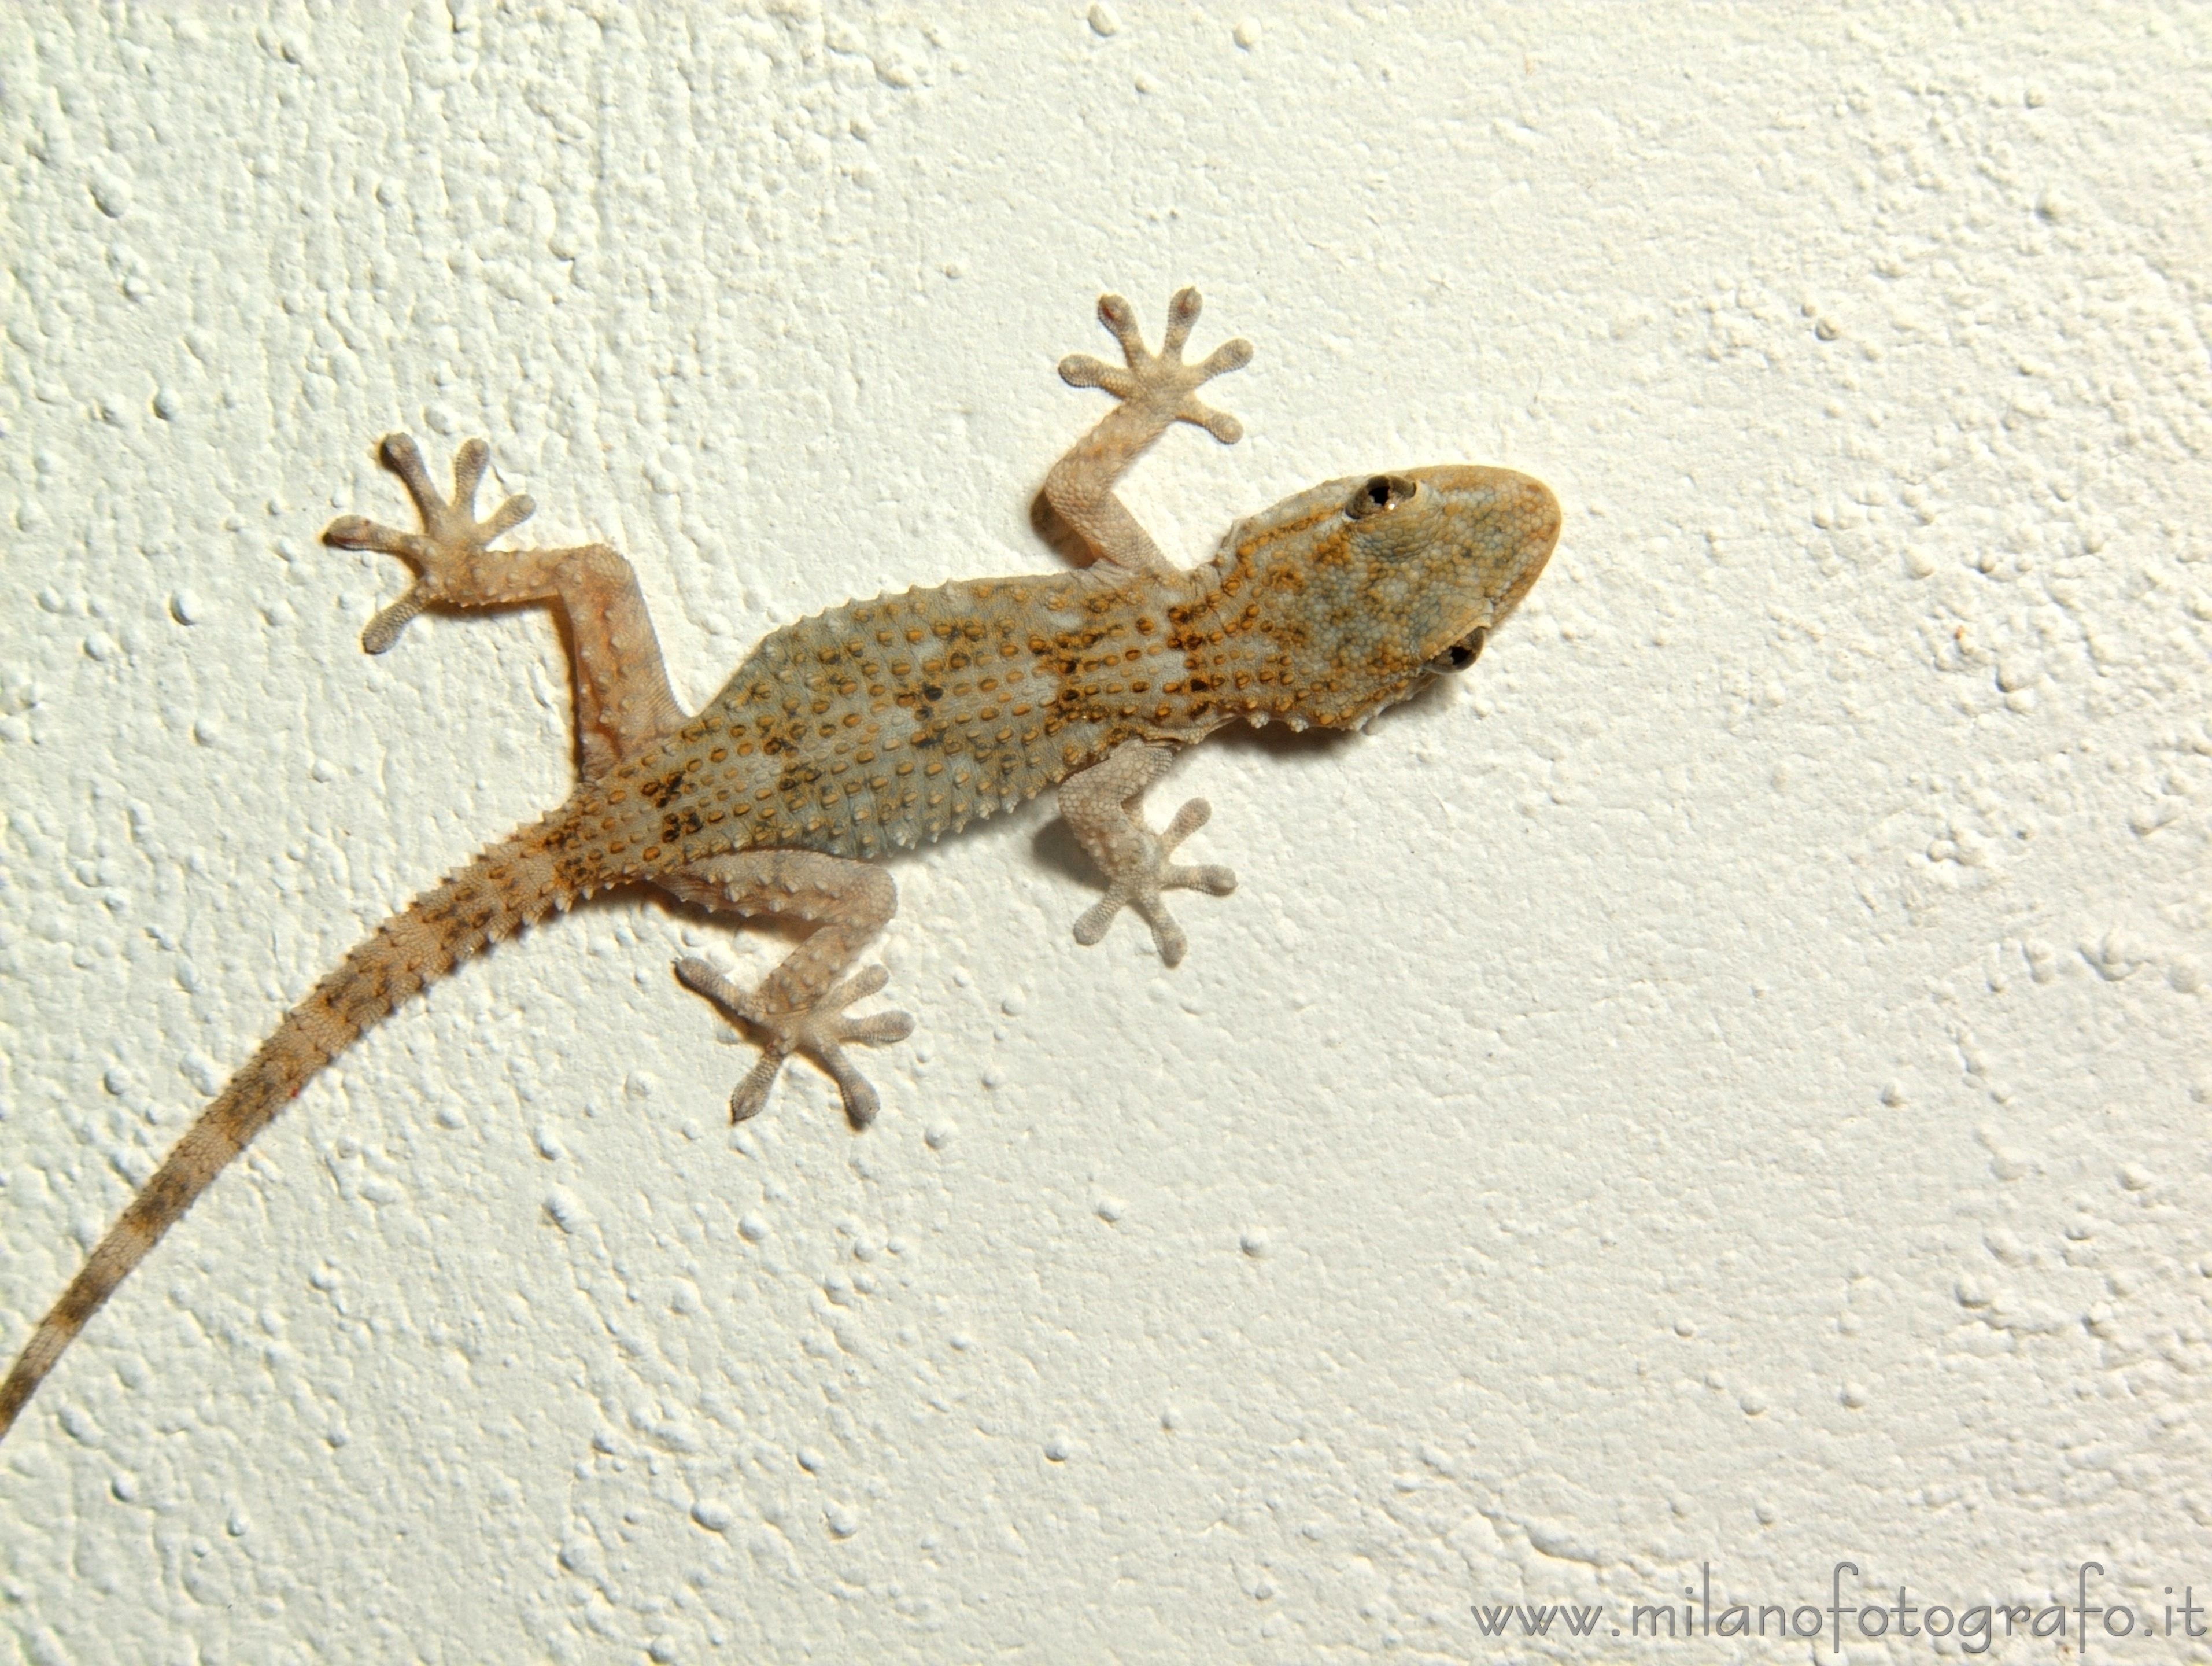 Taviano (Lecce, Italy): Gecko on the wall of a house - Taviano (Lecce, Italy)